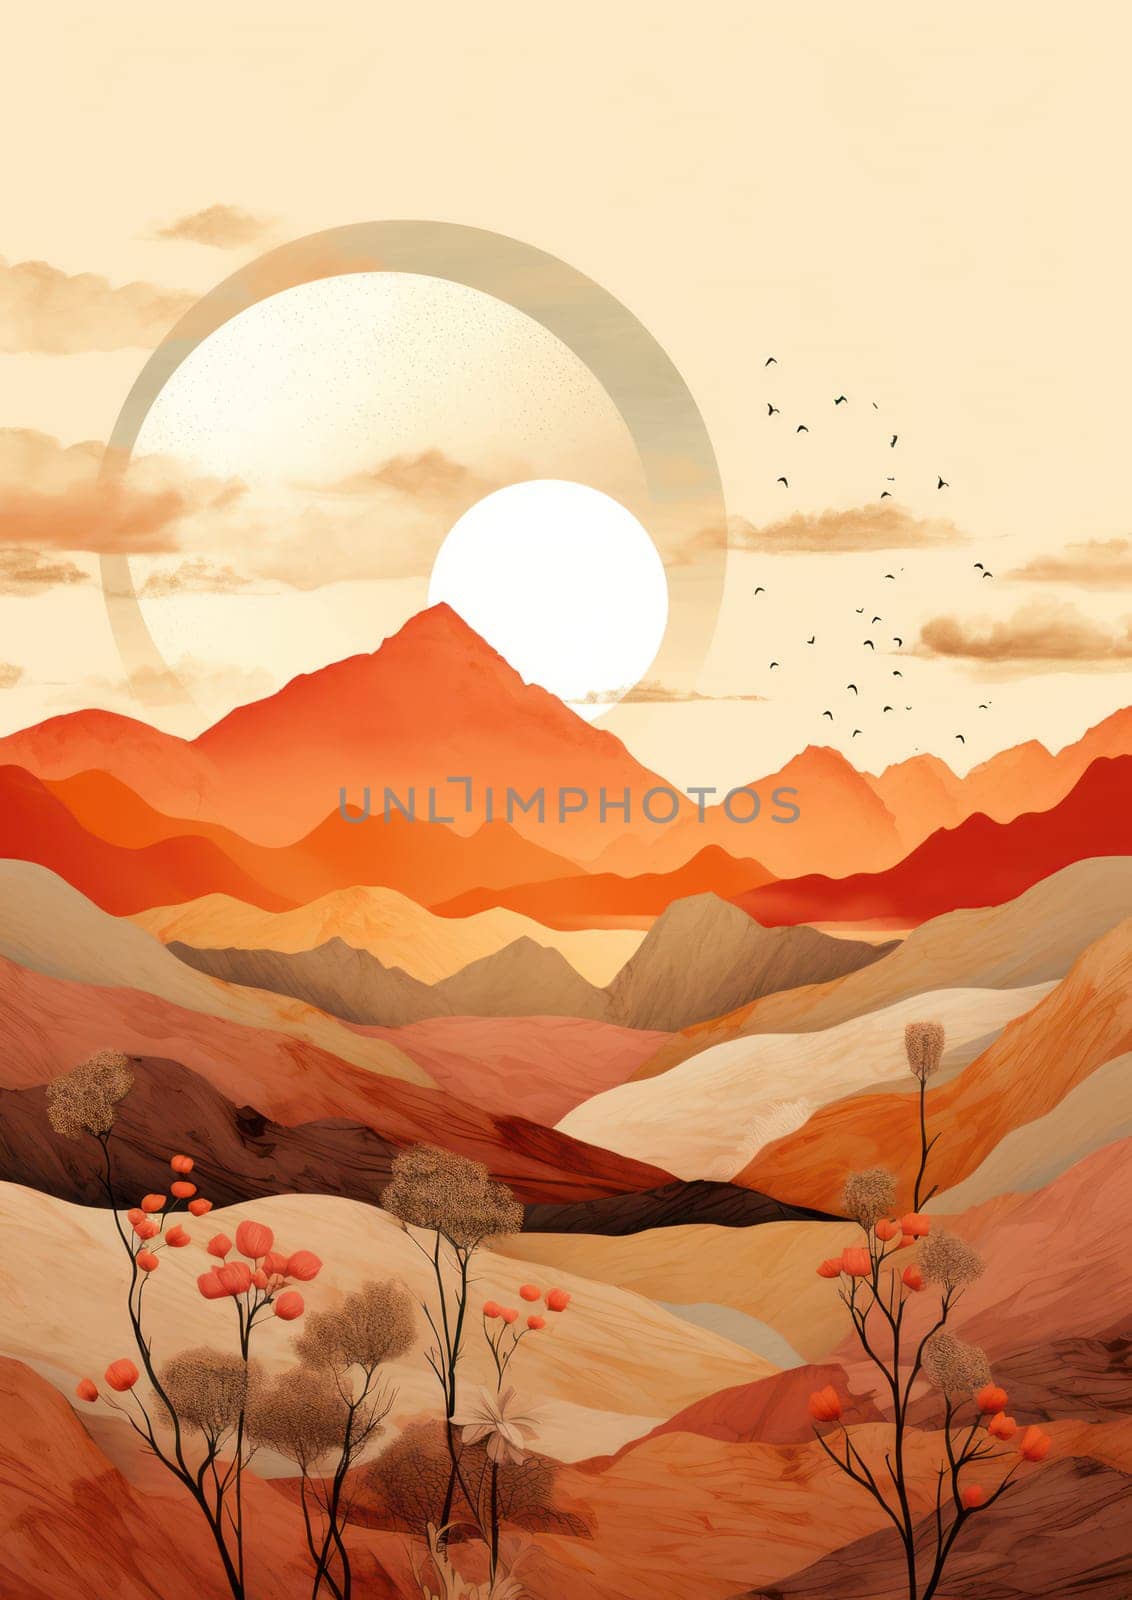 Sunset Silhouette: A Serene Horizon Embracing Majestic Mountains and Lush Forests under the Colorful Evening Sky